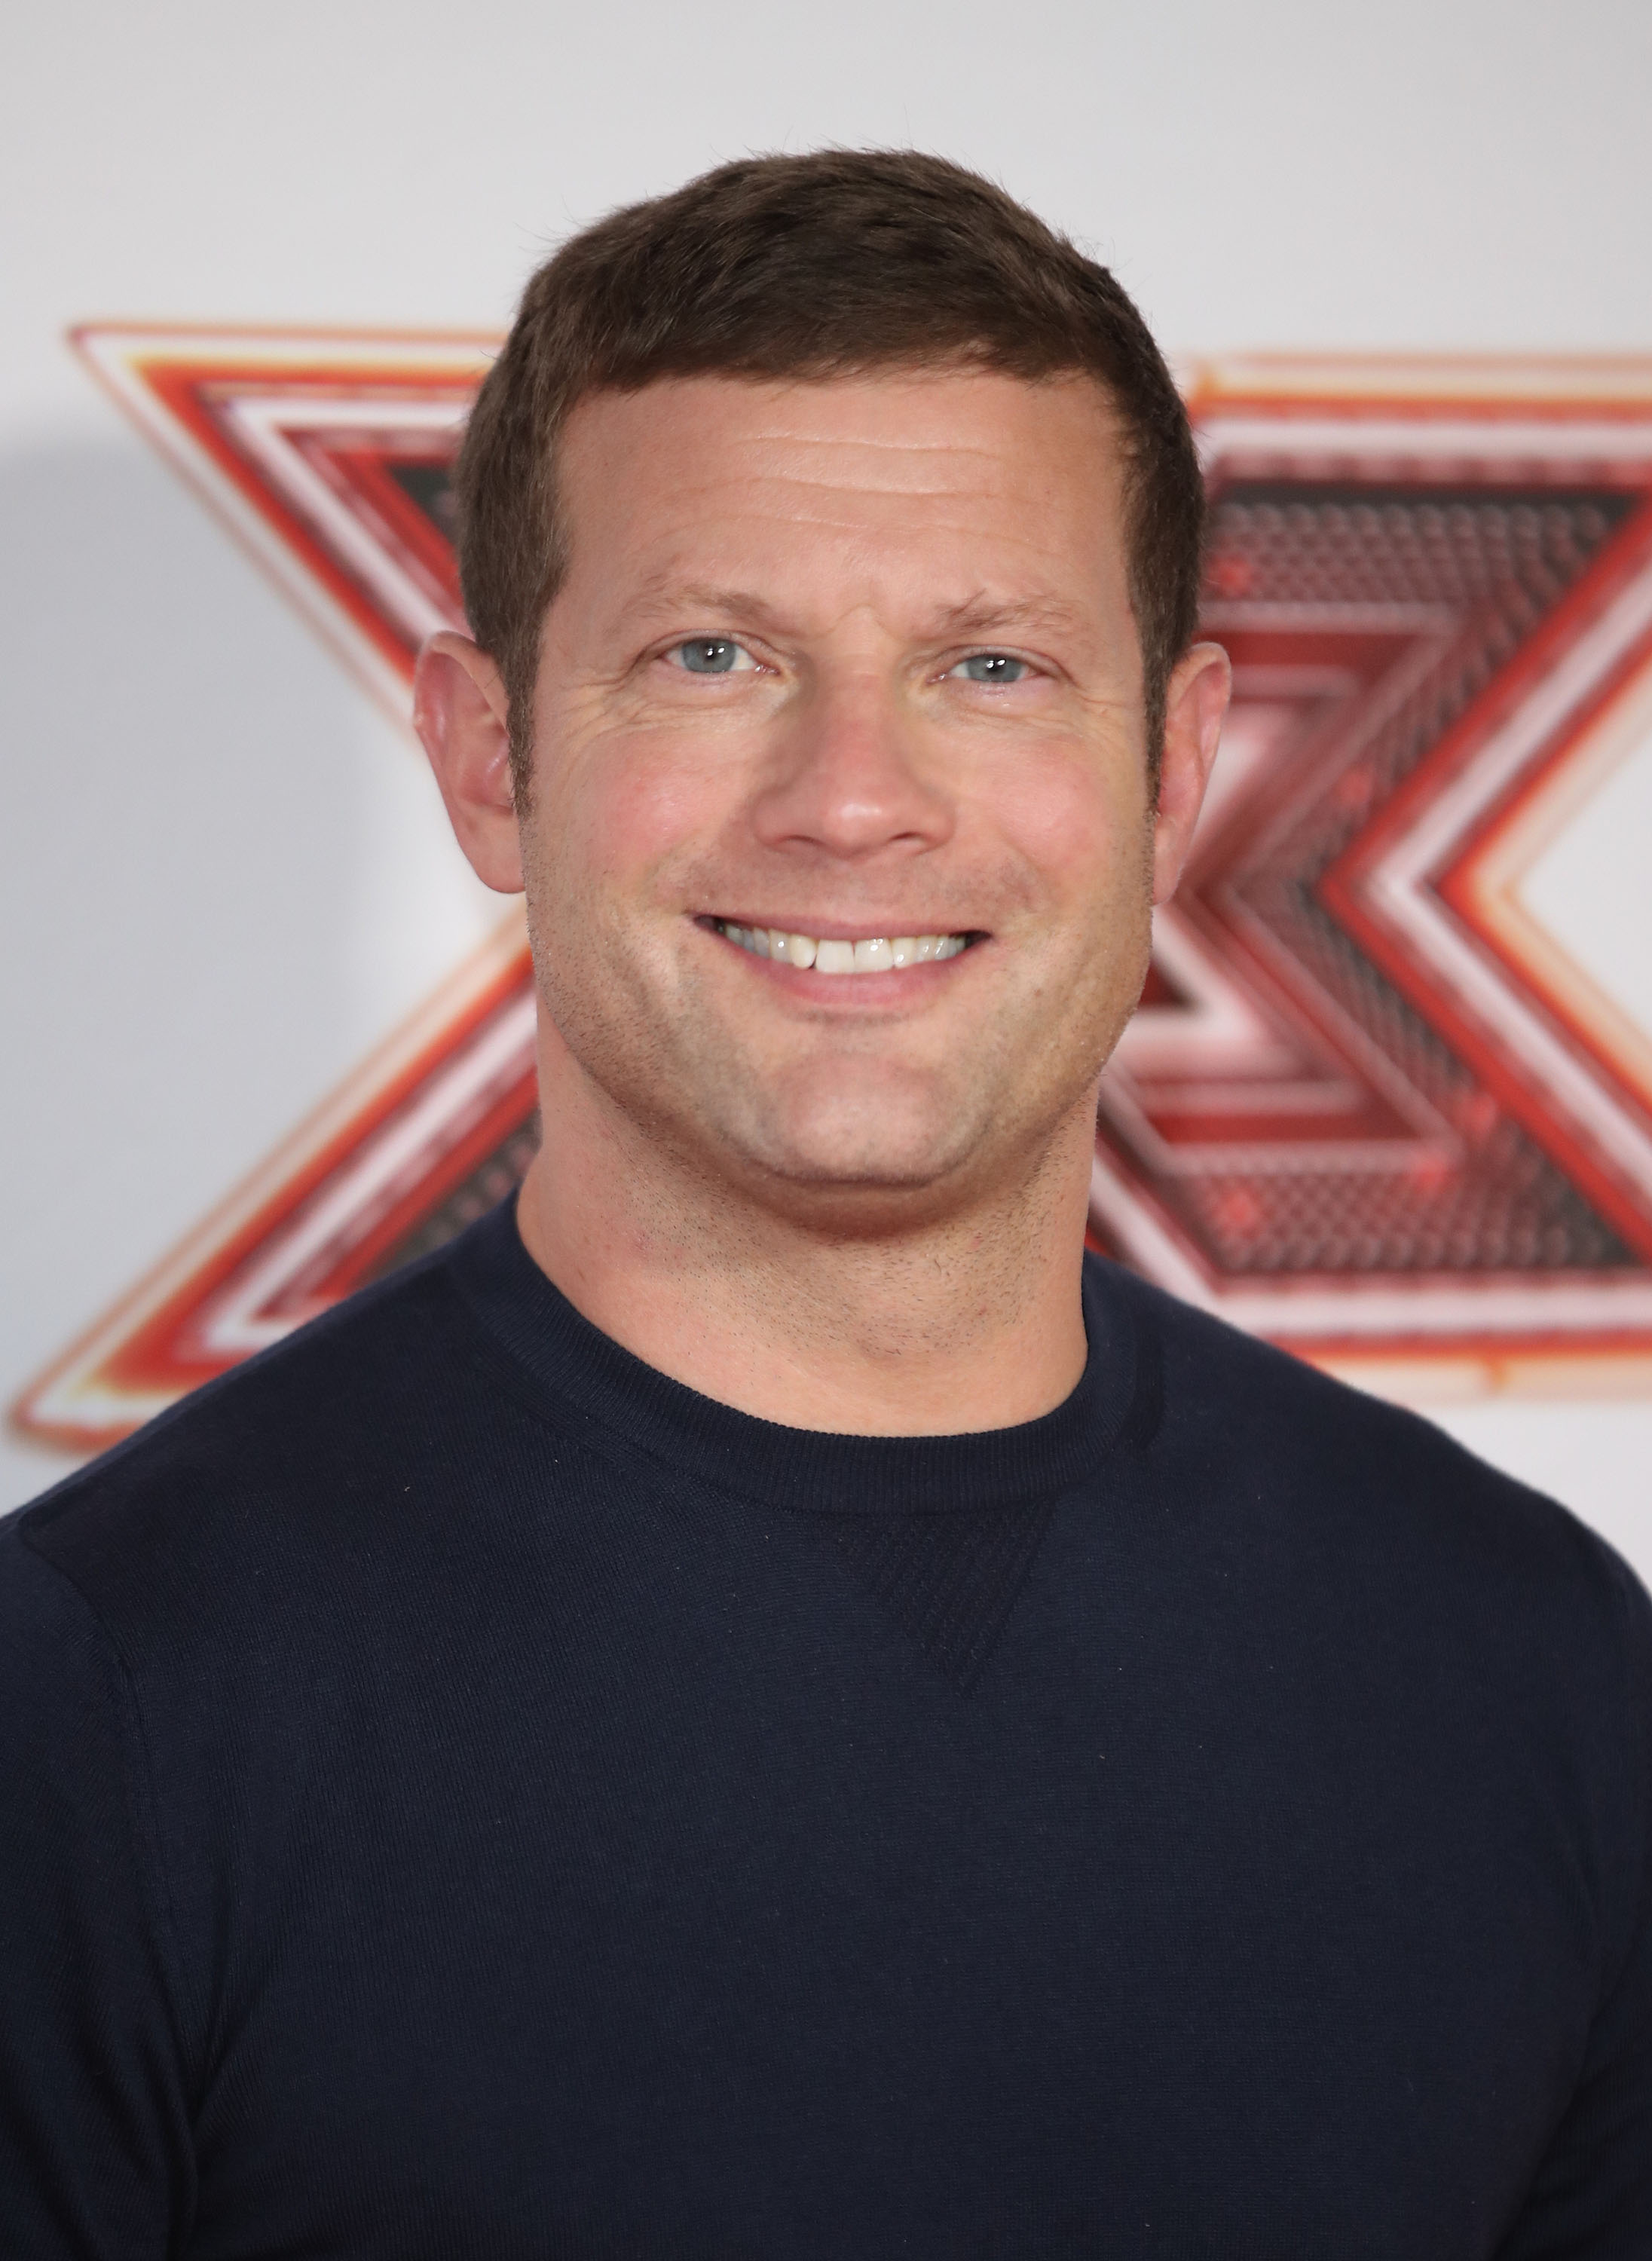 Dermot O'Leary during "The X Factor" series 14 red carpet press launch on August 30, 2017 in London, England | Source: Getty Images